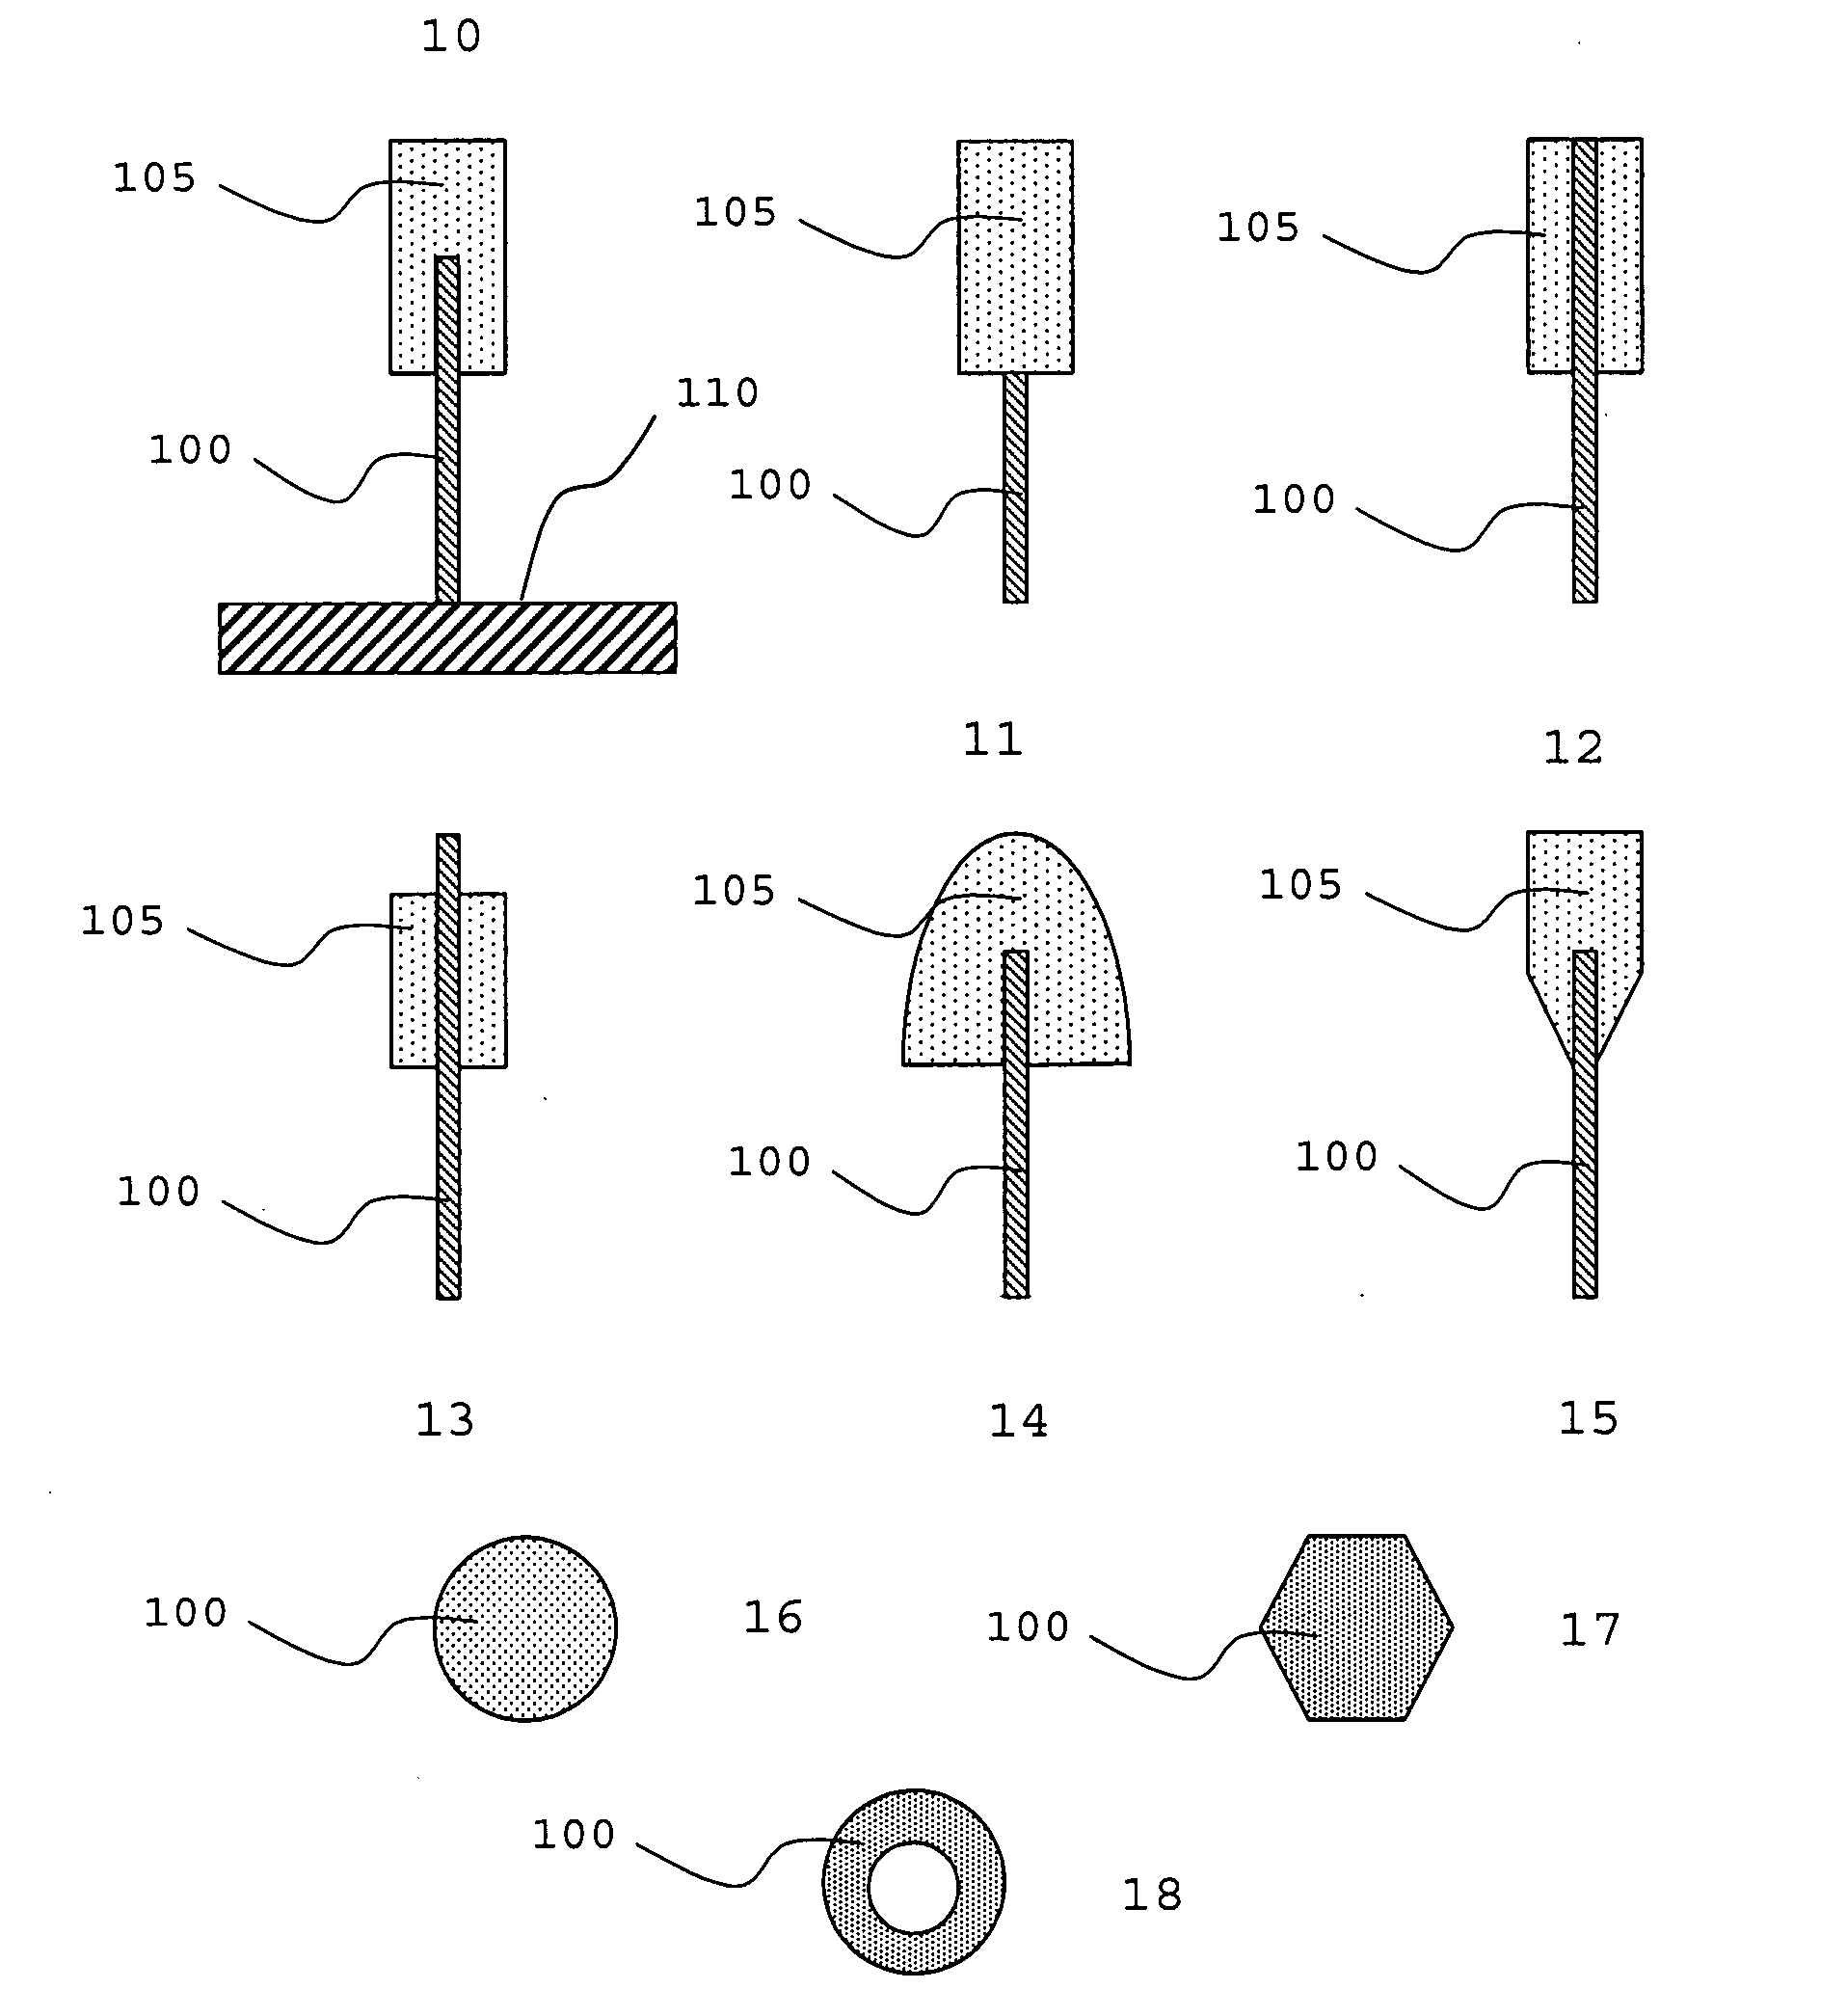 Nanoelectronic structure and method of producing such